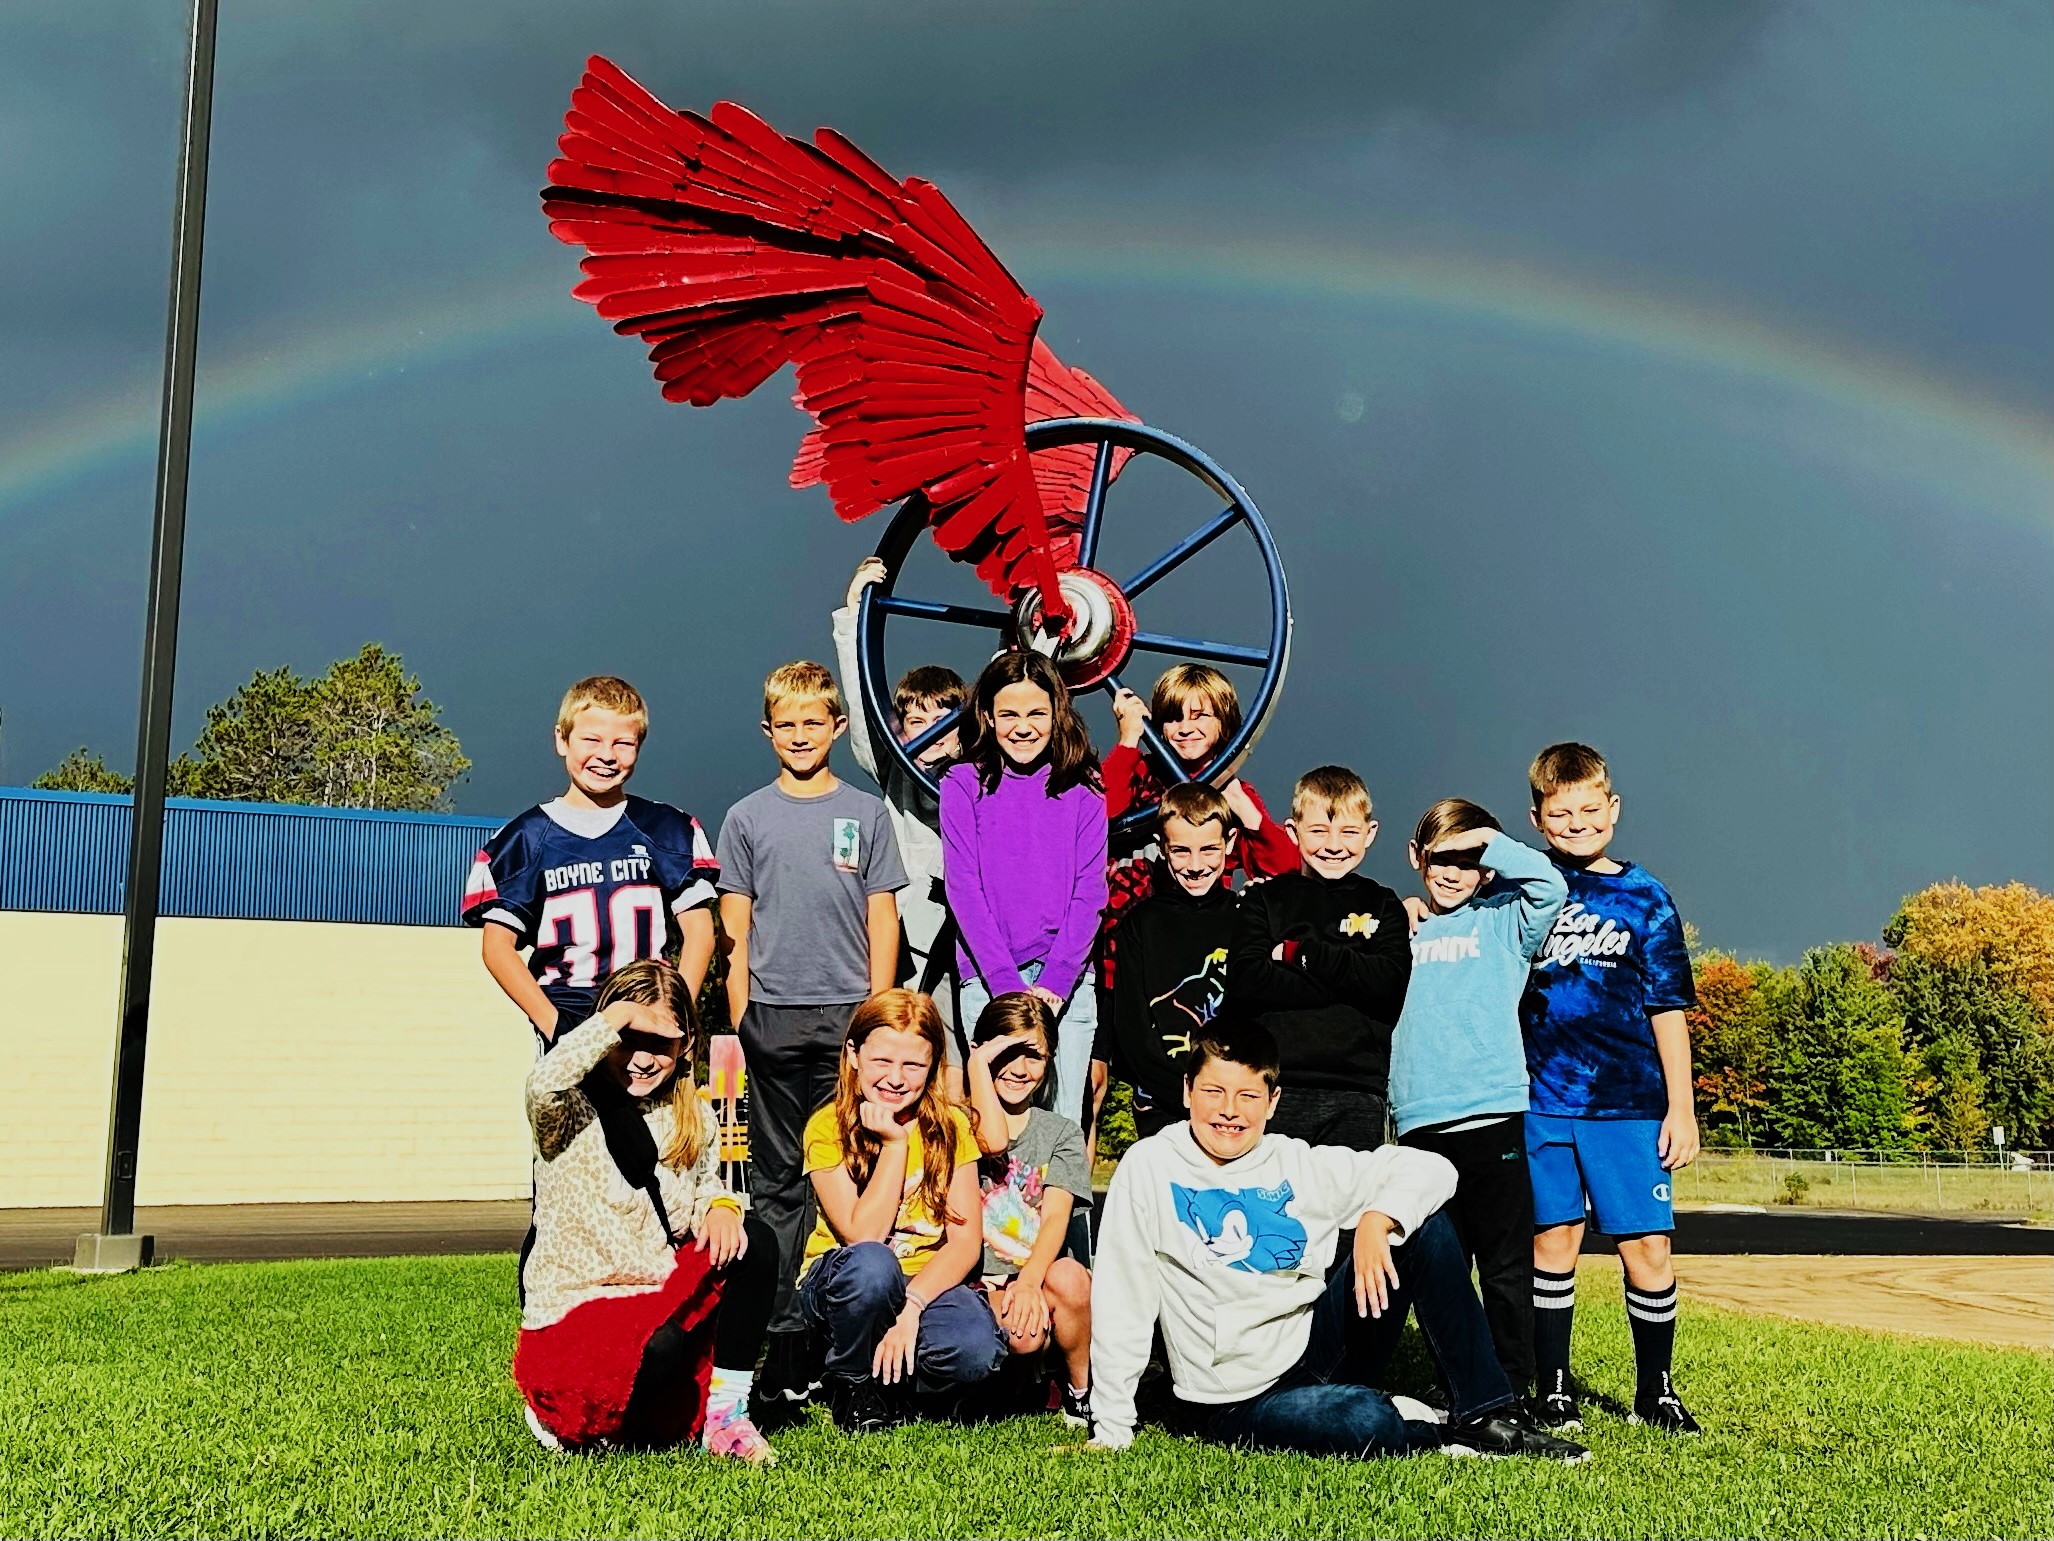 One of the 4th Grade Classrooms posing in front of a rainbow